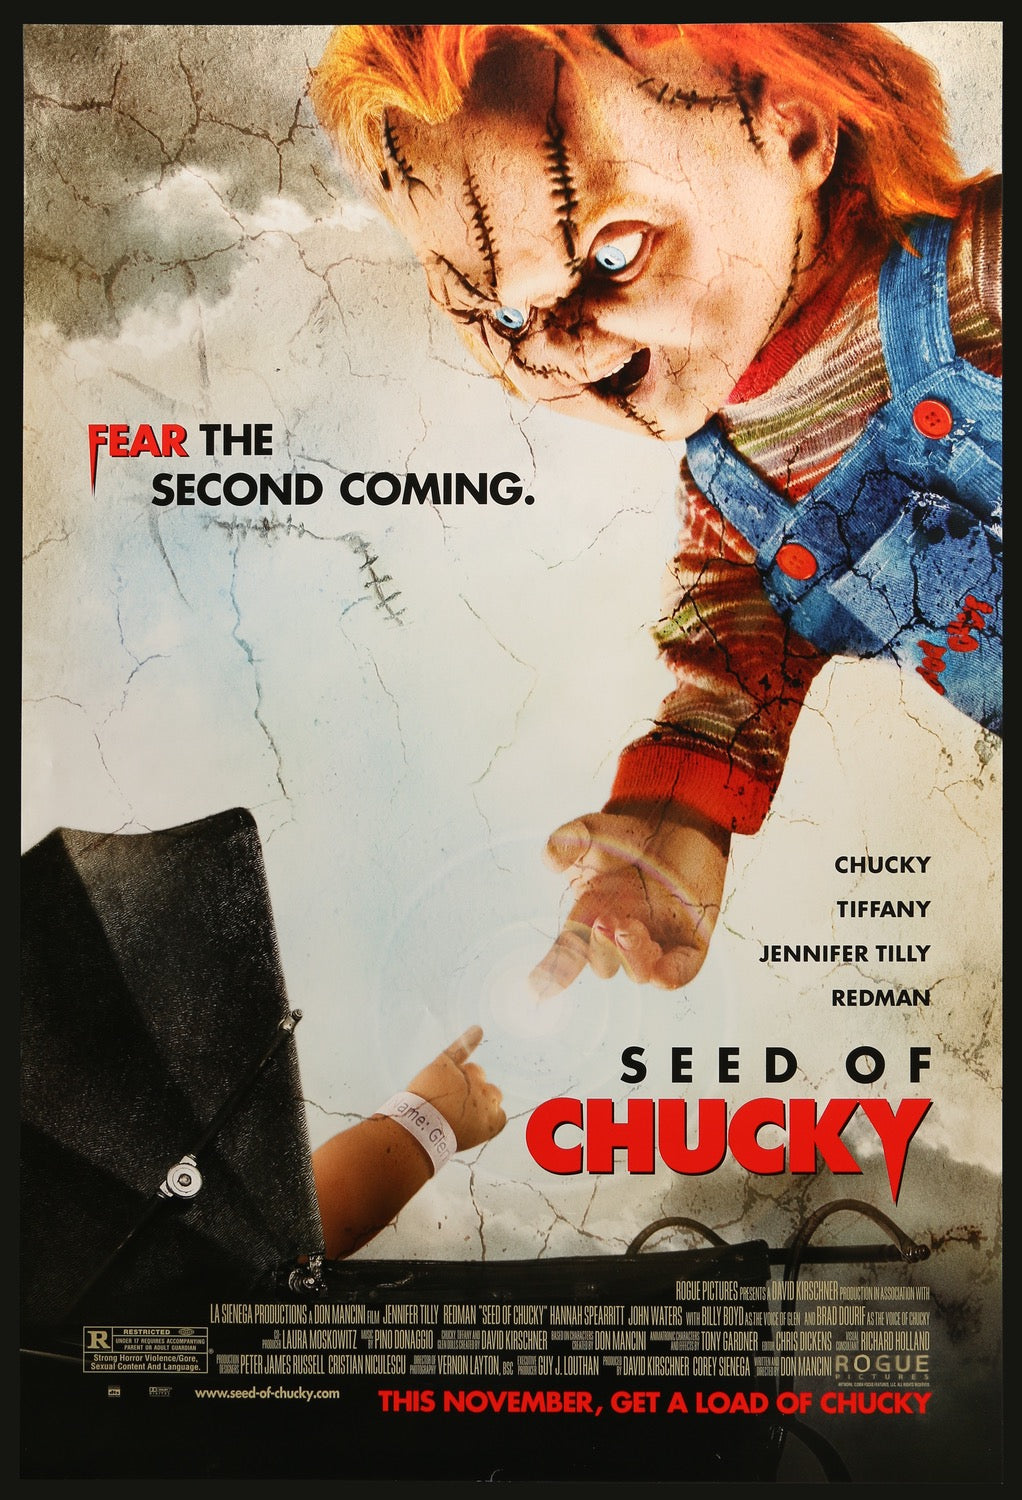 Seed of Chucky (2004) original movie poster for sale at Original Film Art